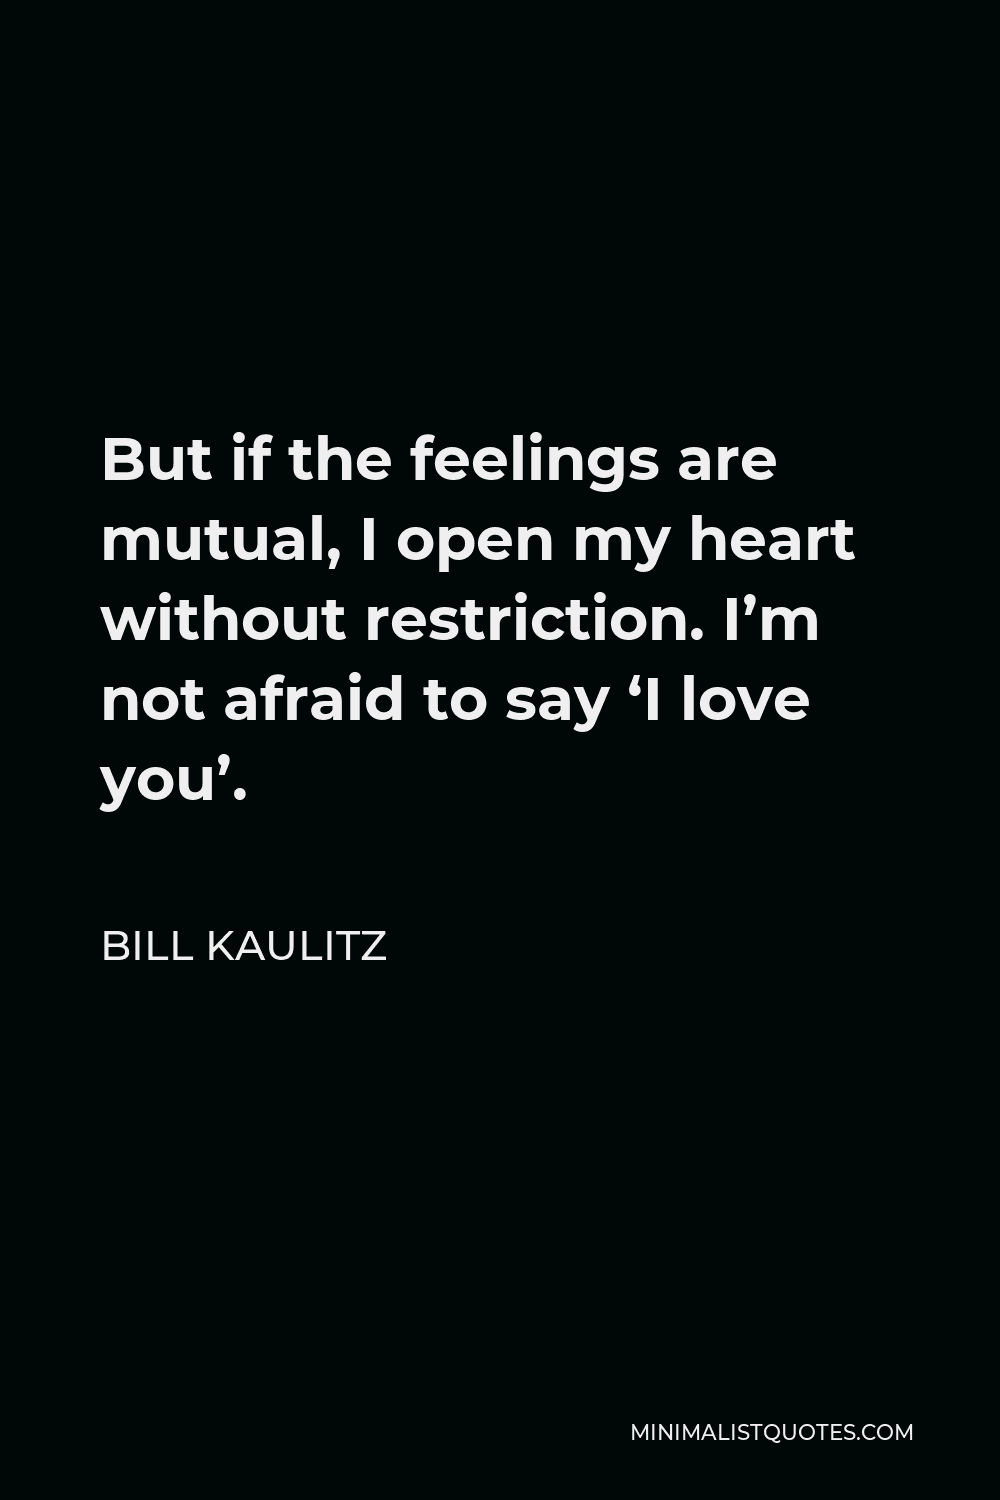 Bill Kaulitz Quote - But if the feelings are mutual, I open my heart without restriction. I’m not afraid to say ‘I love you’.